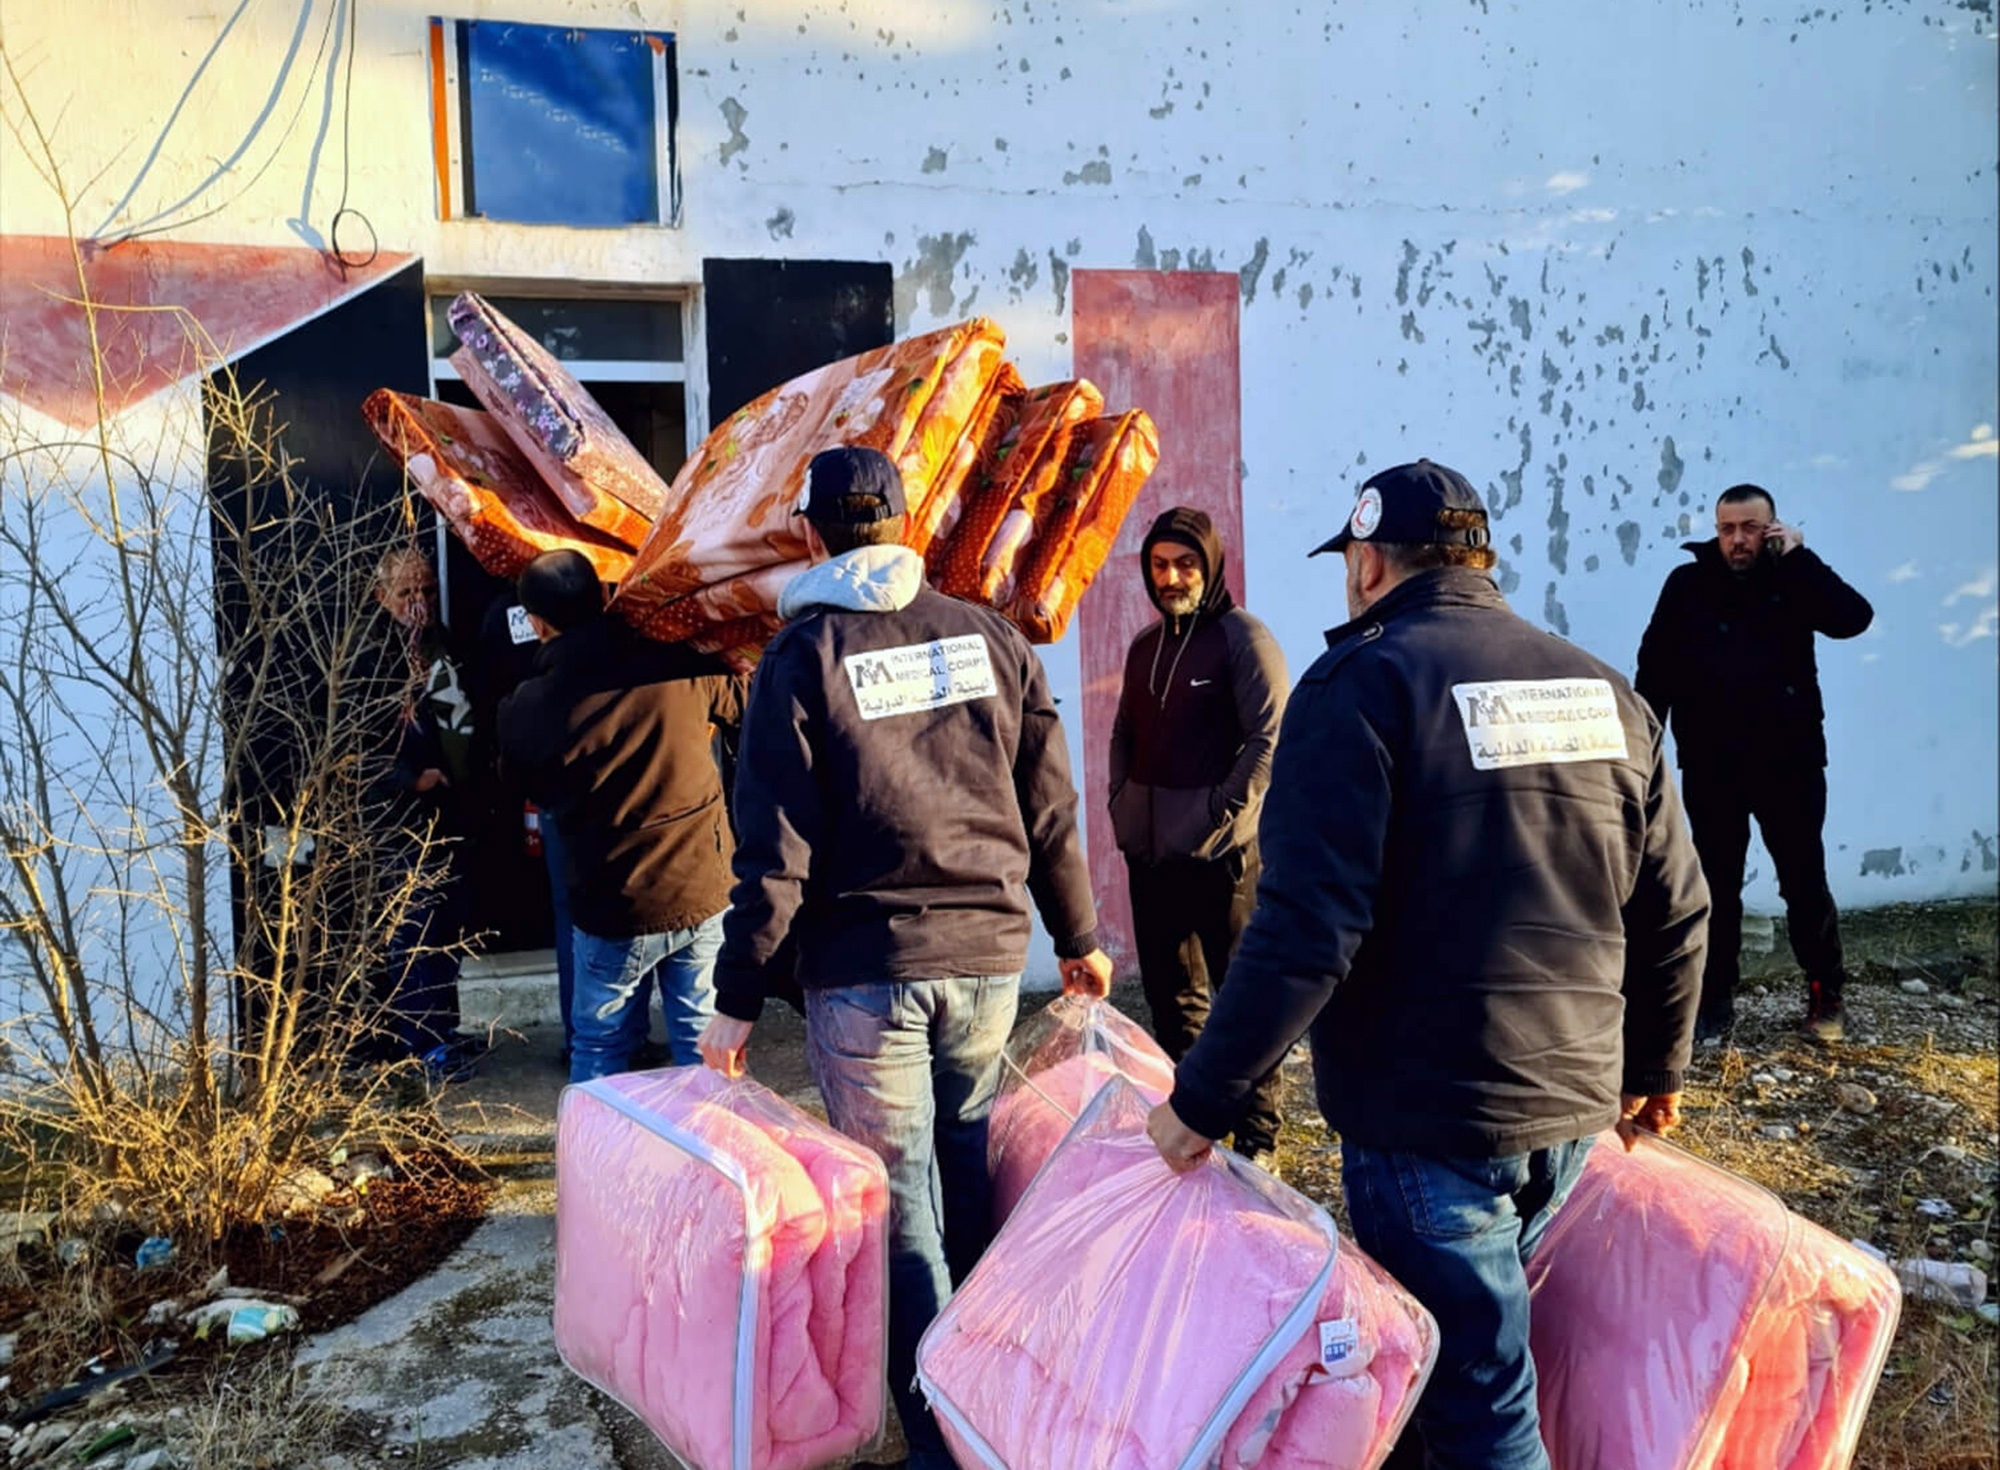 International Medical Corps’ teams deliver mattresses and bedding to a shelter for earthquake-affected communities in Syria.